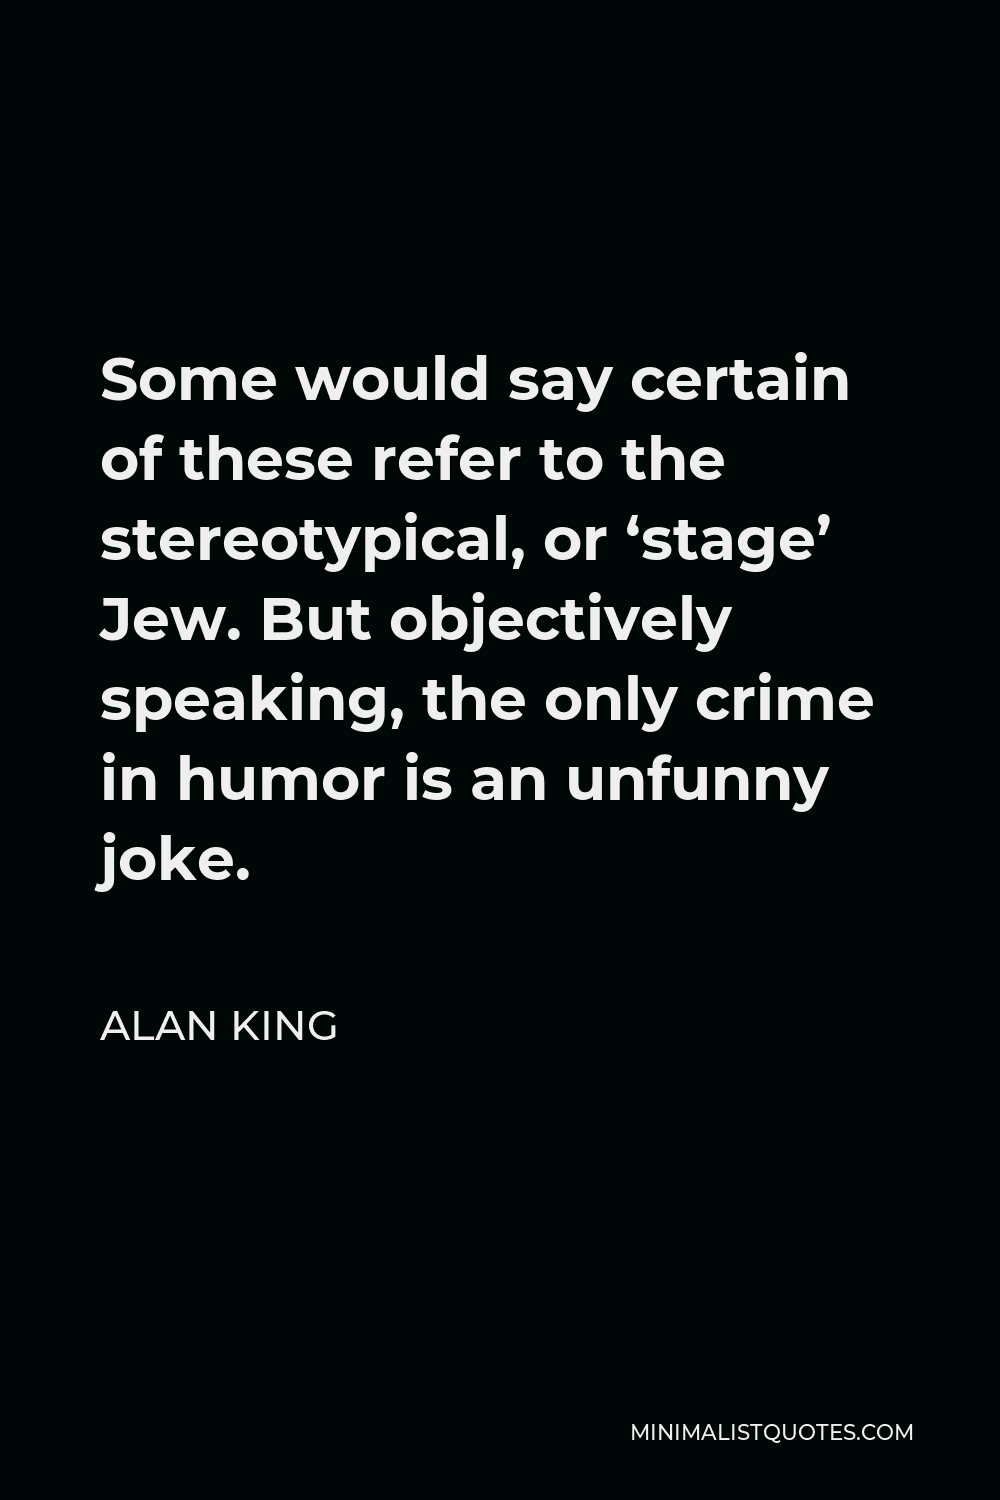 Alan King Quote - Some would say certain of these refer to the stereotypical, or ‘stage’ Jew. But objectively speaking, the only crime in humor is an unfunny joke.